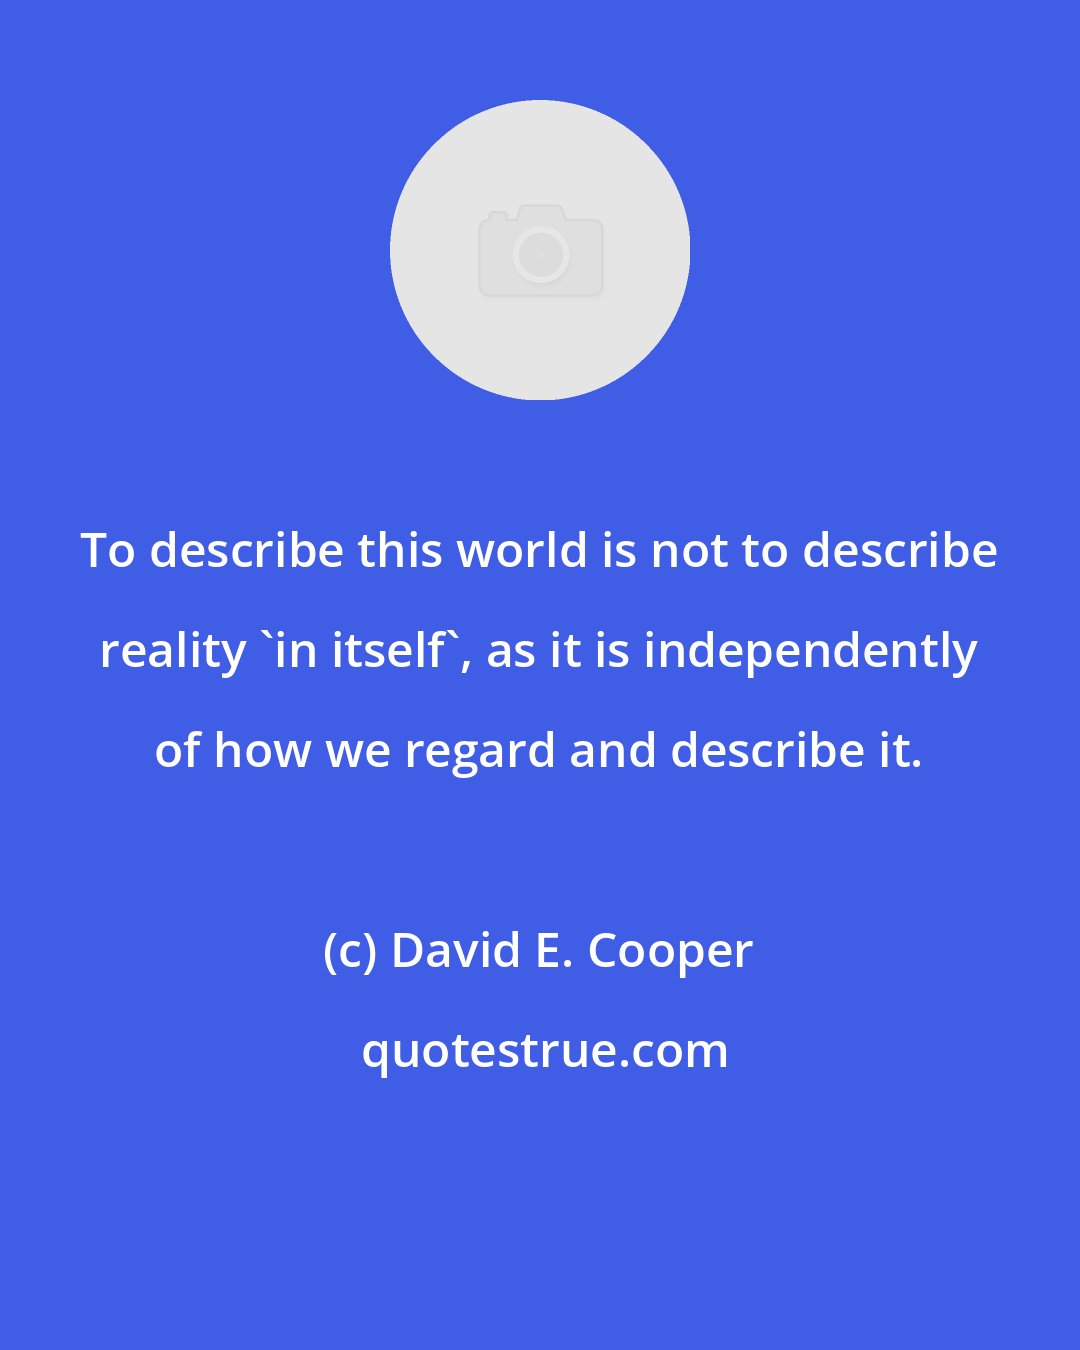 David E. Cooper: To describe this world is not to describe reality 'in itself', as it is independently of how we regard and describe it.